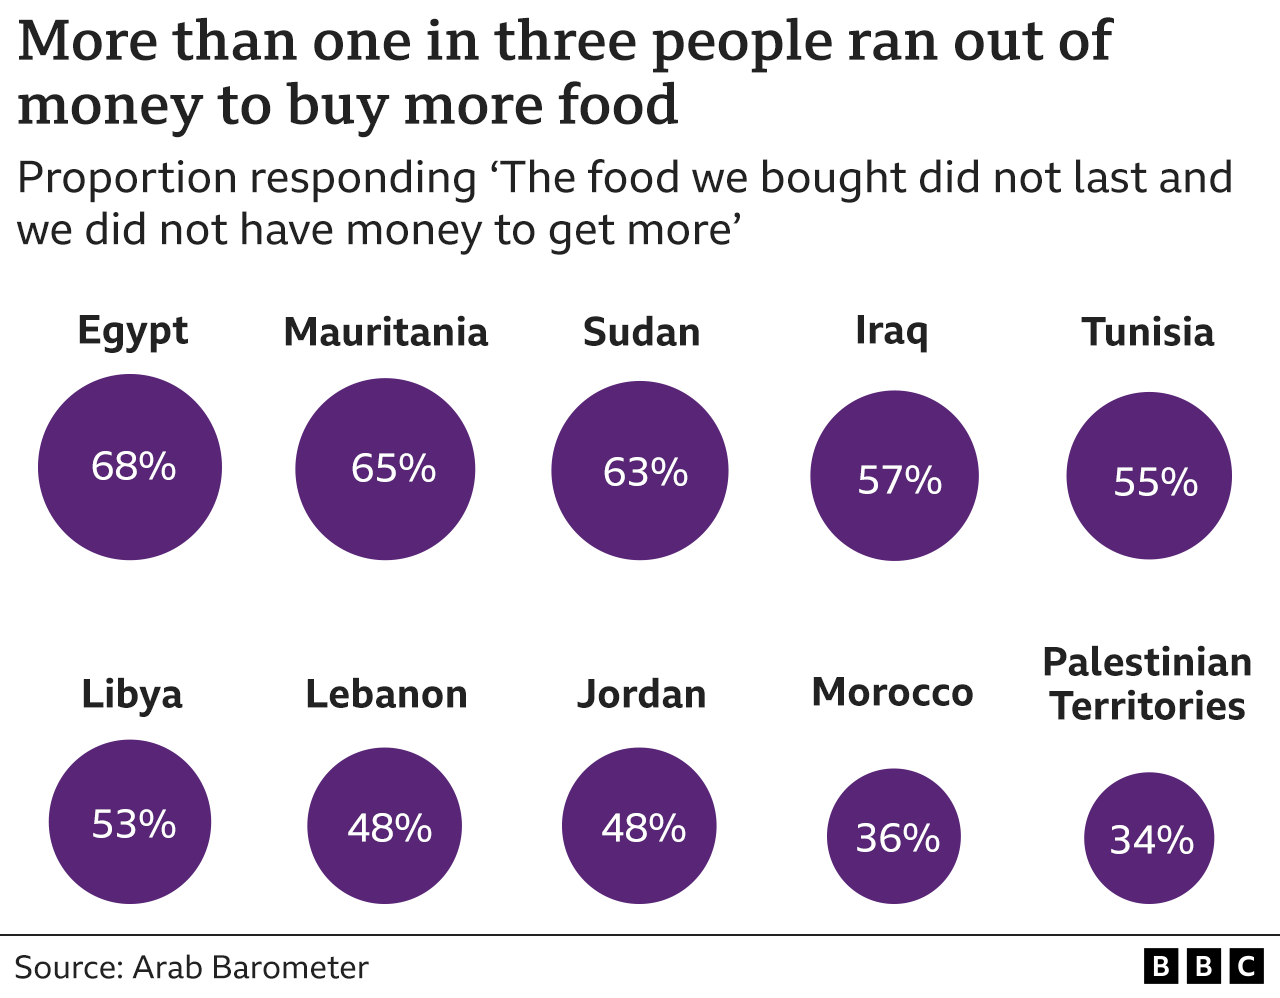 Chart showing how many people were unable to keep food on the table before getting enough money to buy more. The Palestinian Territories and Morocco had the lowest proportion, but still higher than one in three. Egypt had the highest proportion with more than two in three people (68%) saying this happened sometimes or often.